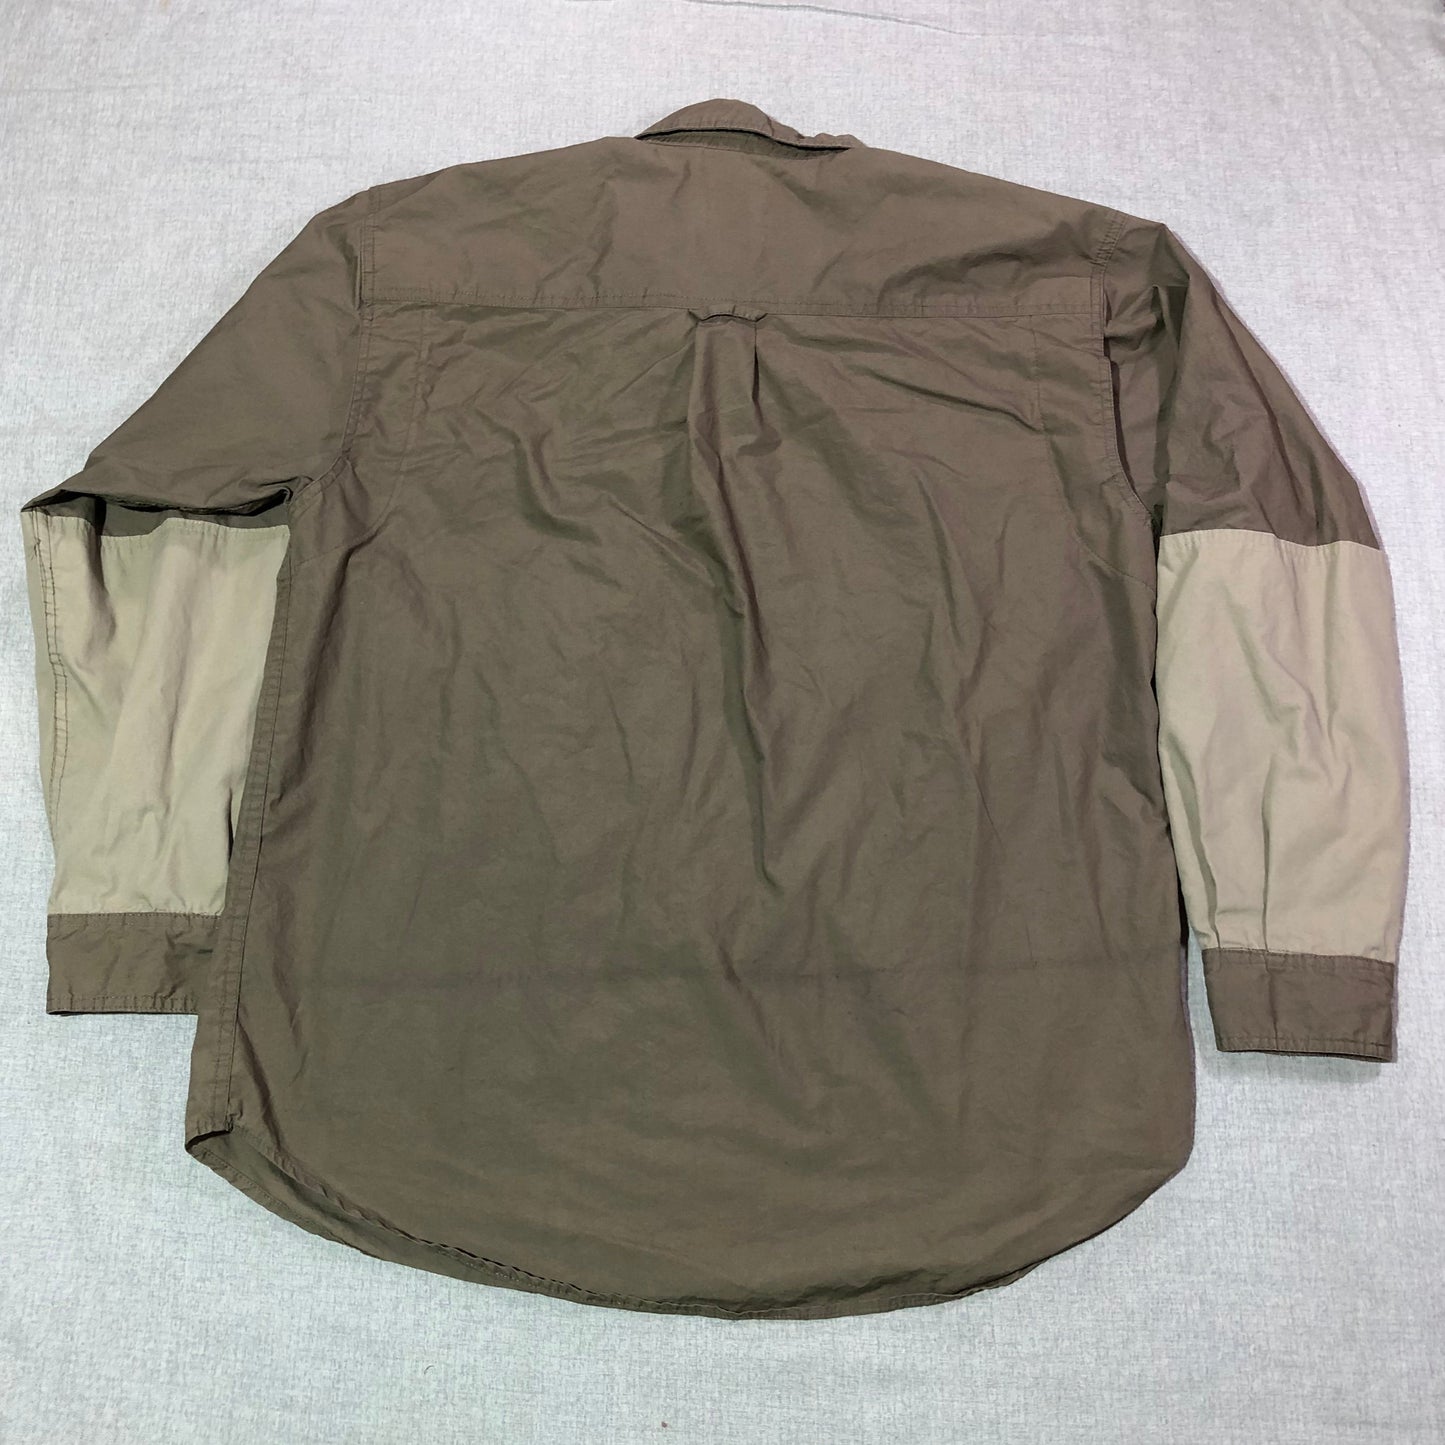 NRA Outdoors Shirt Mens L Button Down Padded Shooting Zip Pocket Vented